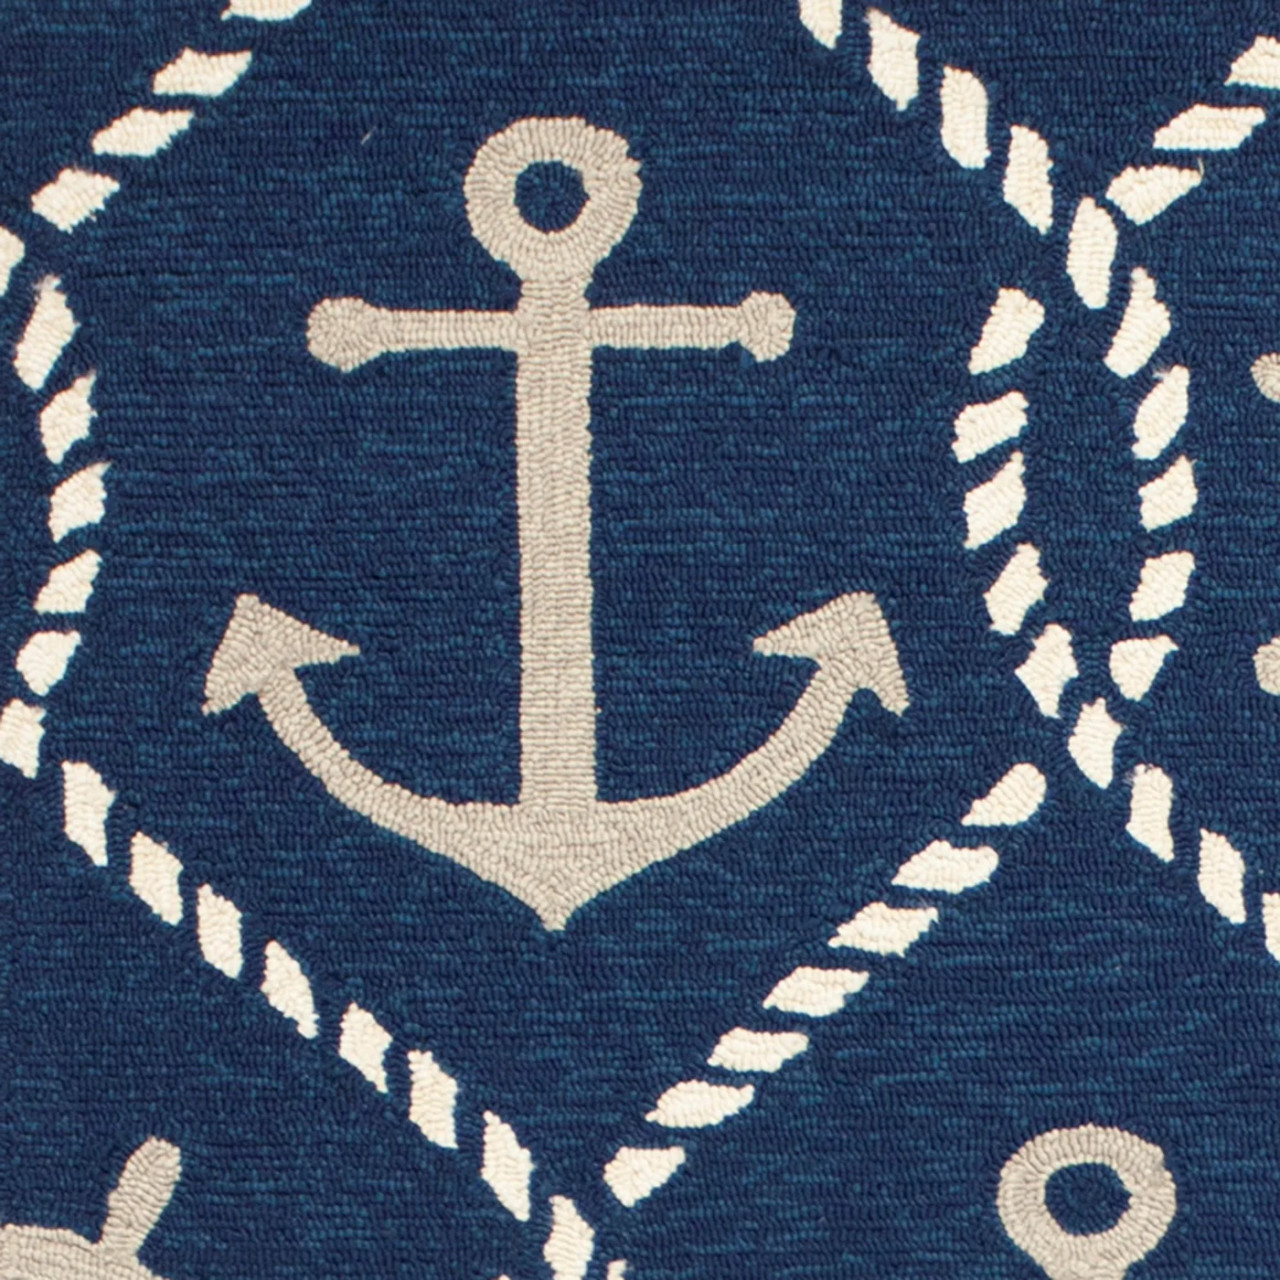  Lunarable Blue Nautical Laundry Bag, Simple Anchor in